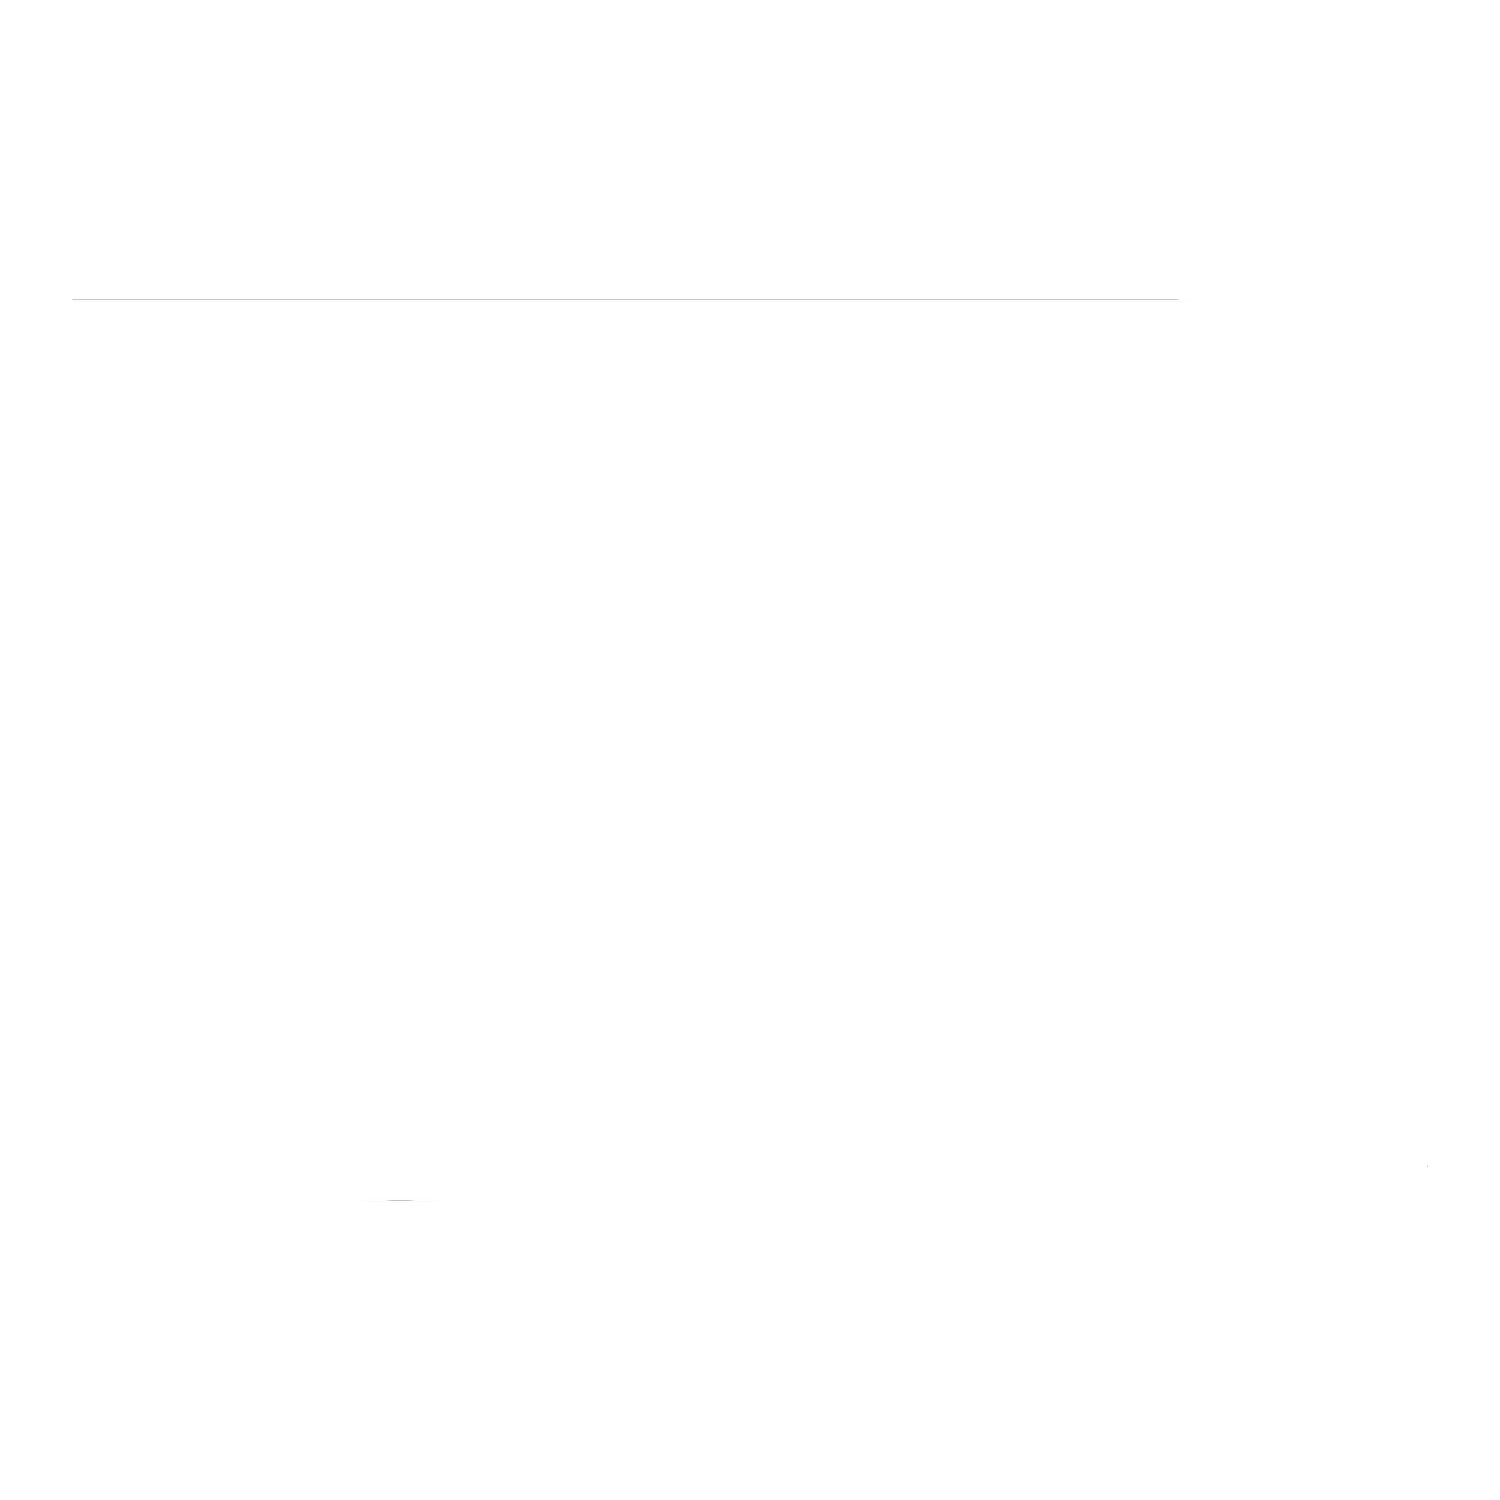 The official website of Jonathan Rizk